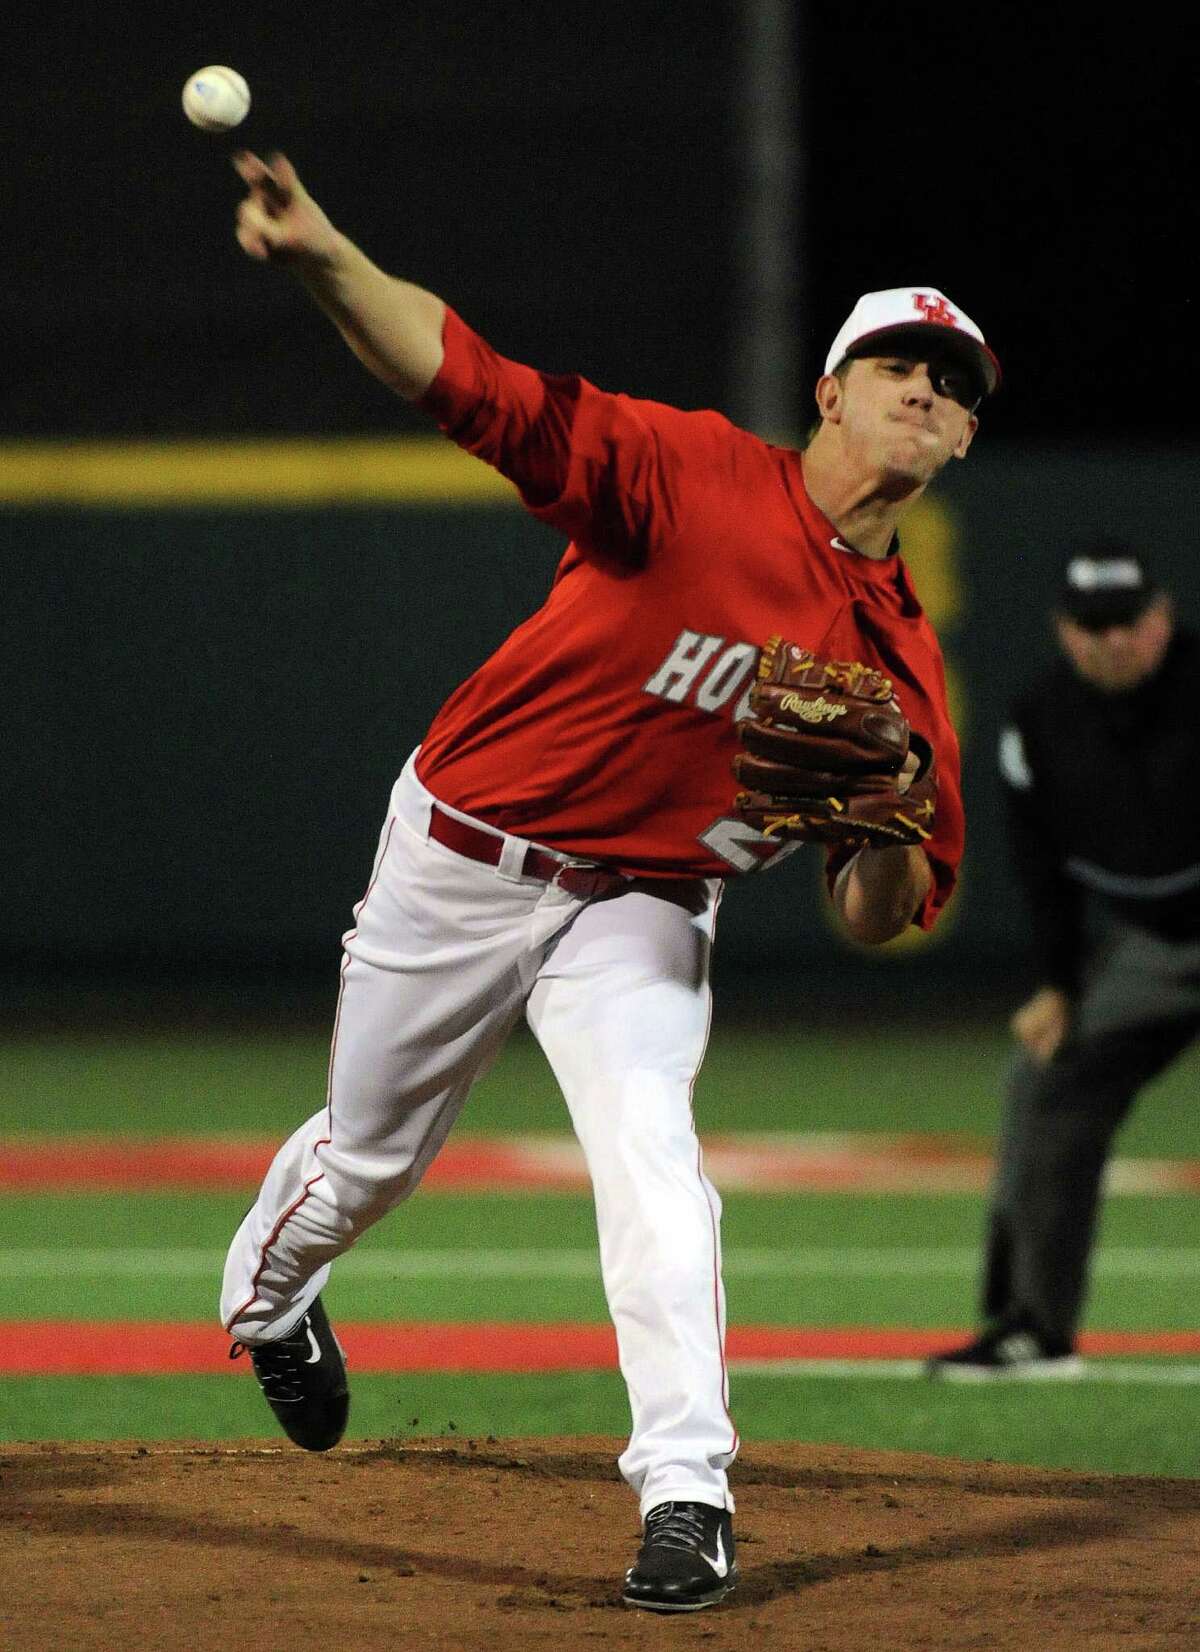 Lemoine settles down to pitch No. 3 Cougars past Minnesota